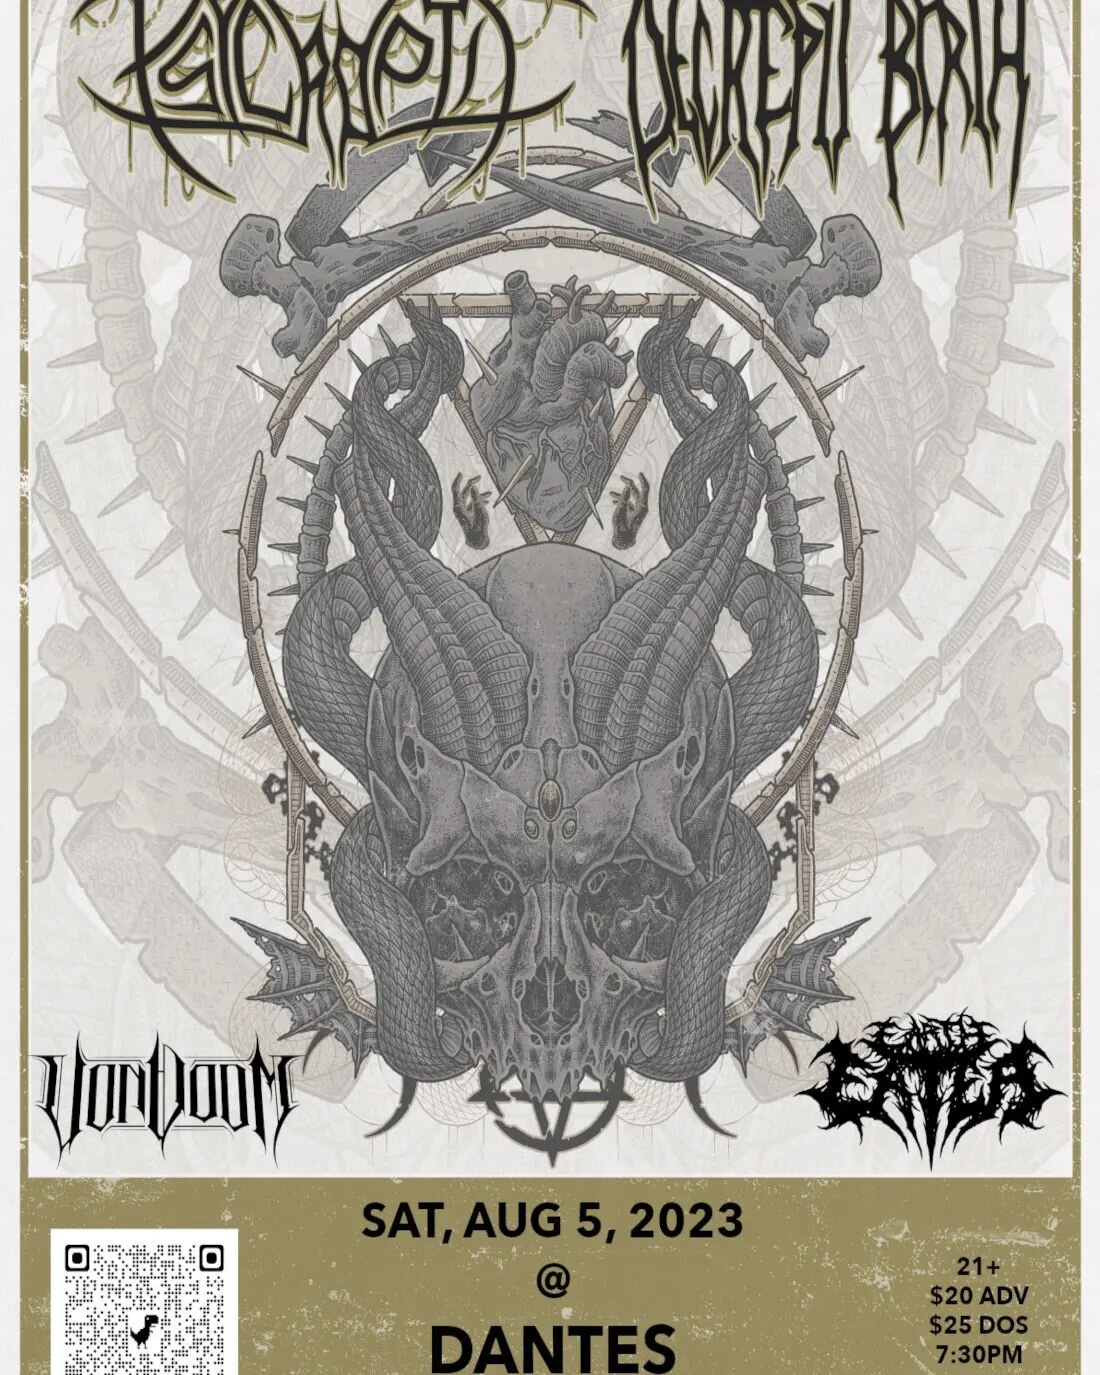 On Saturday, August 5th - @psycroptic_official, @decrepitbirth, Von Doom, and @eartheaterofficial @ @dantesportland! 
.
Tickets for this show are just $20 in advance. Ready to purchase yours? Send us a DM and we'll arrange for delivery! 🤘😄🤘
.
----